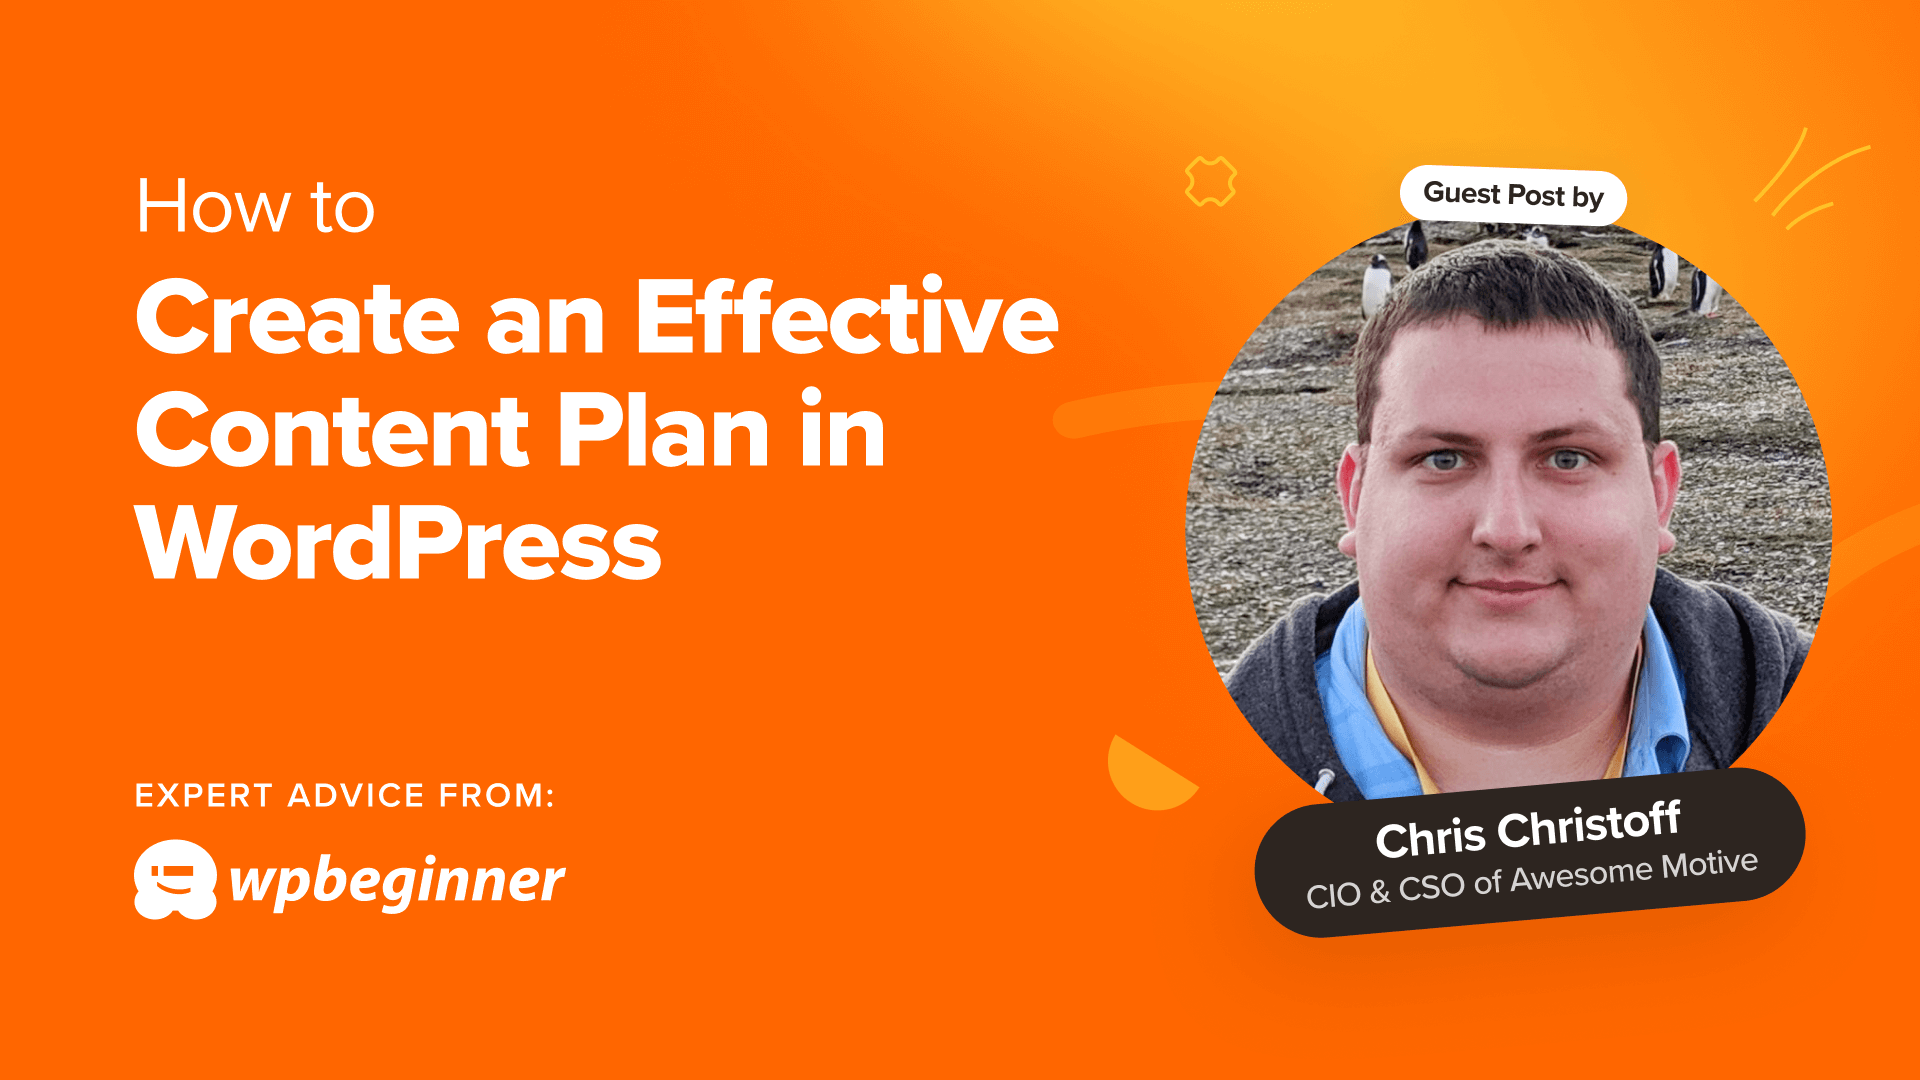 how-to-create-an-effective-content-plan-in-wordpress-(9-expert-tips)